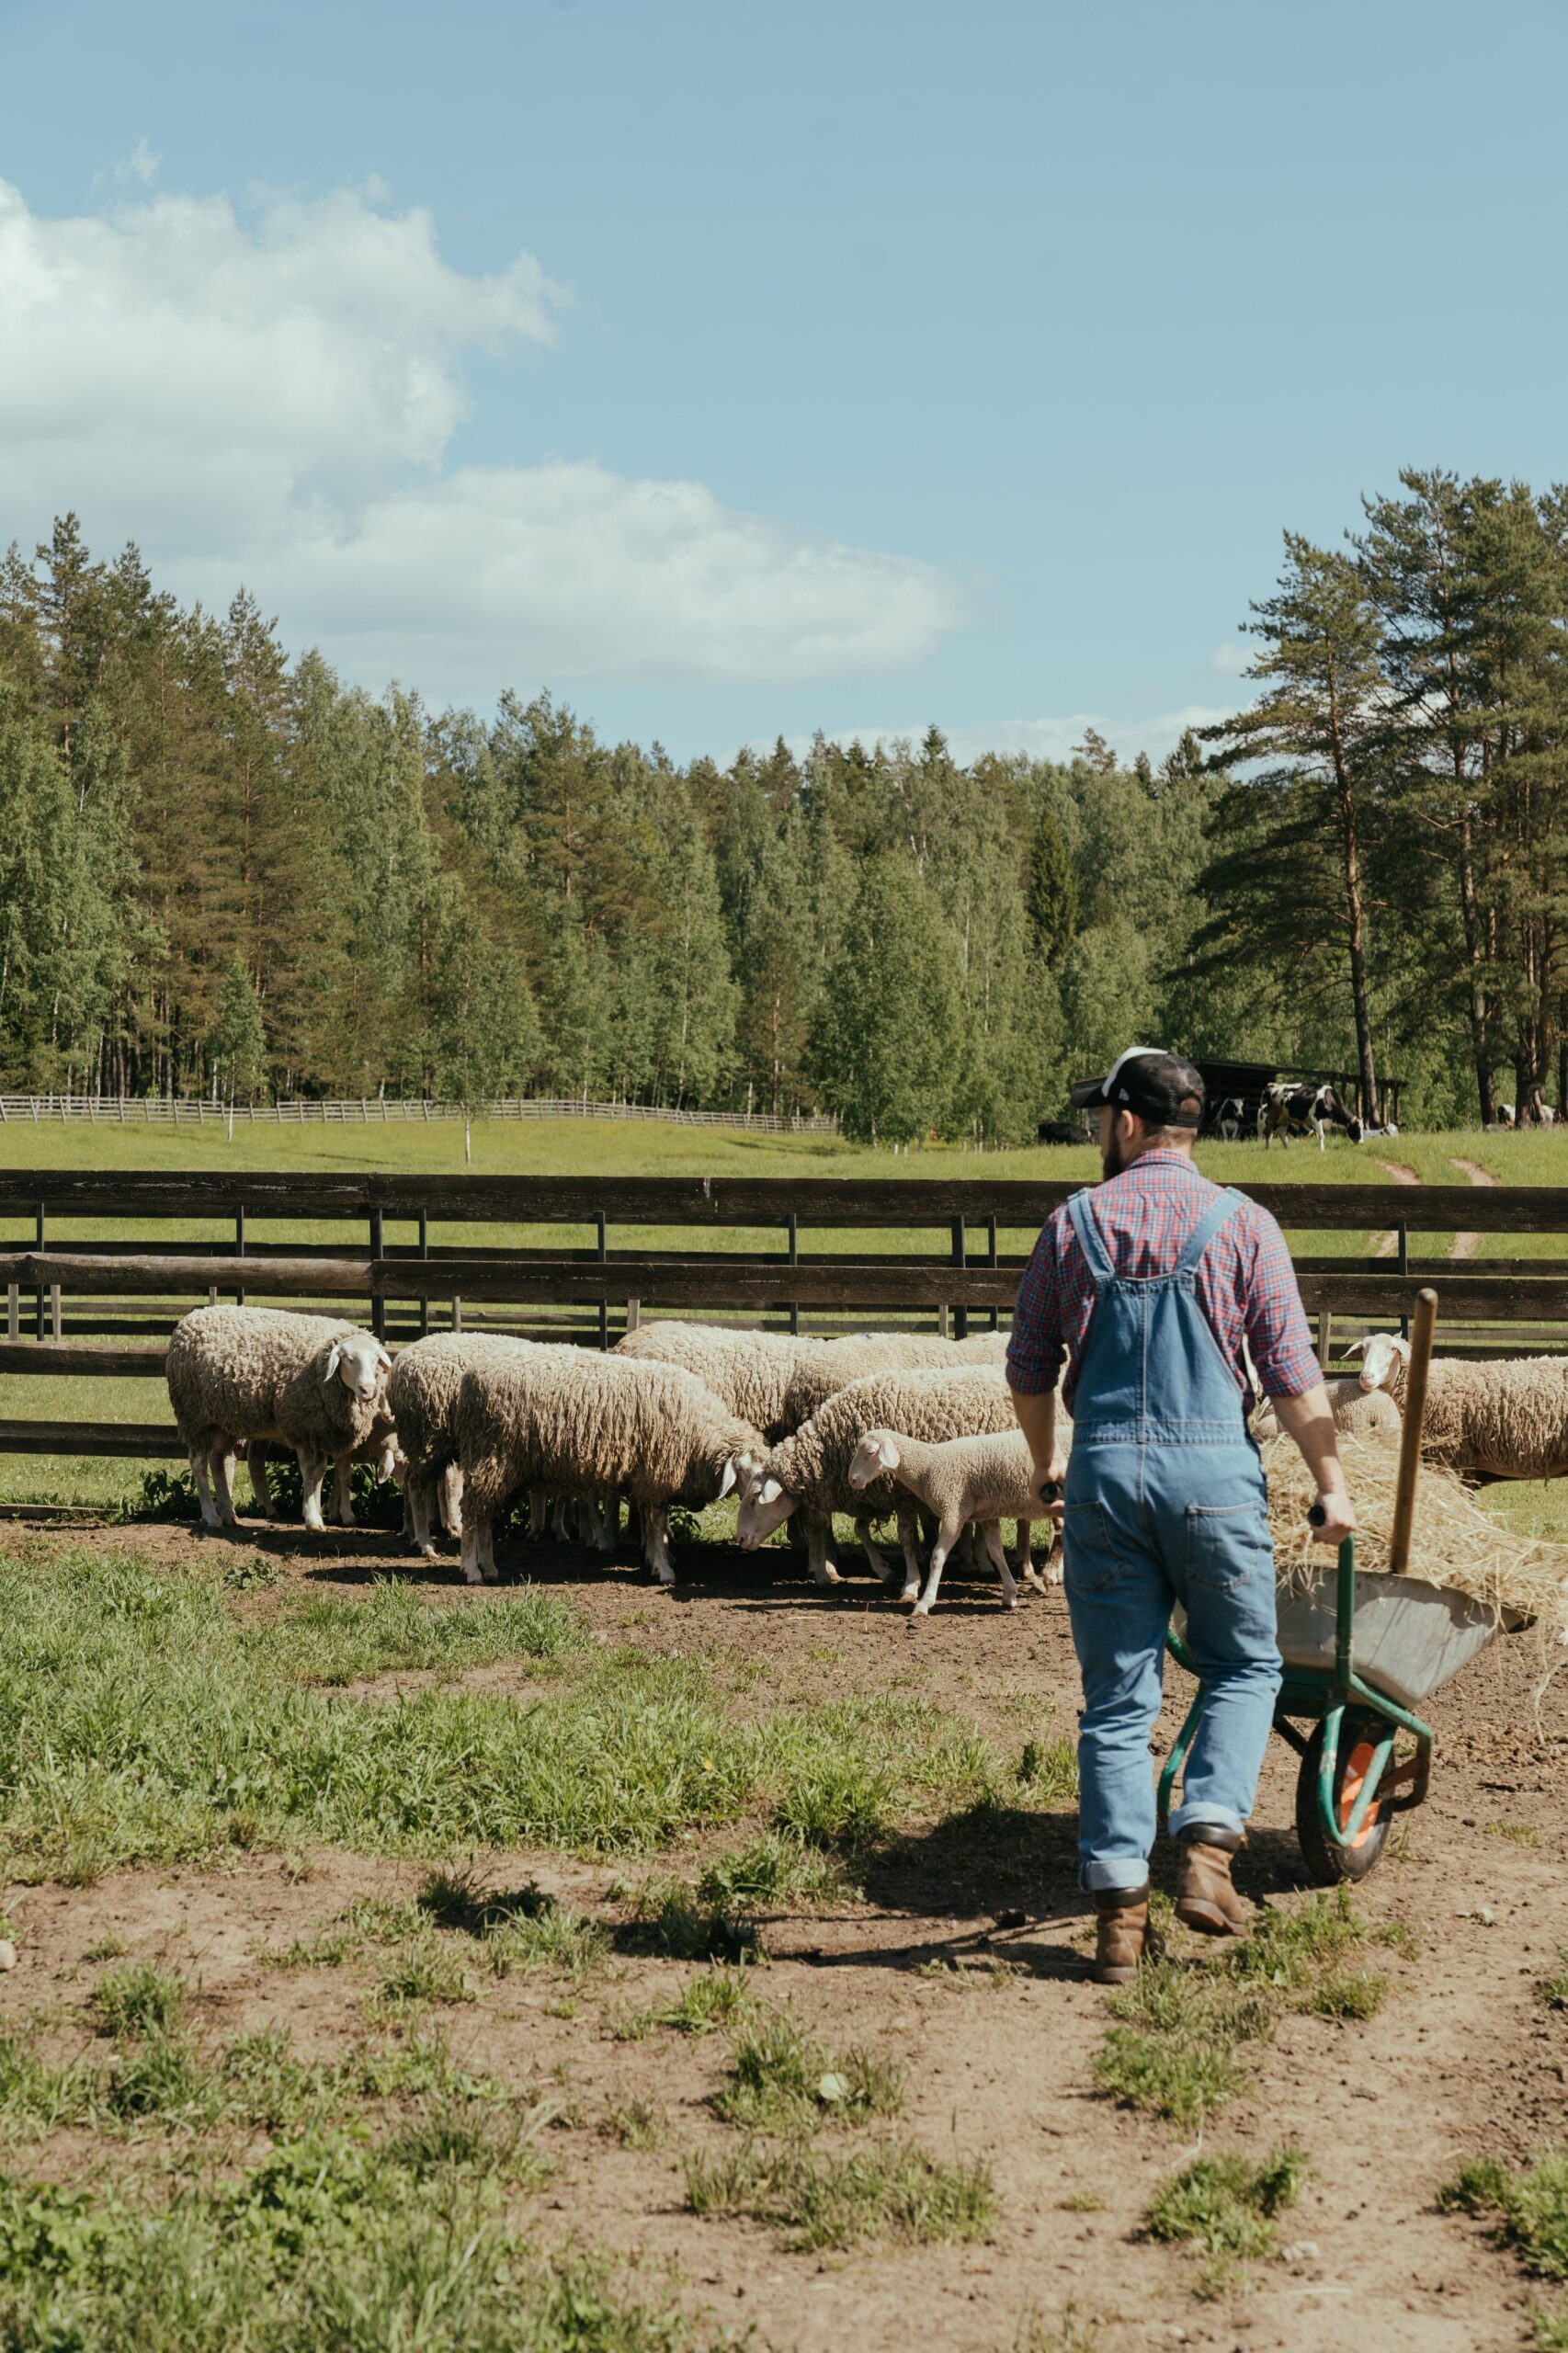 Man in Blue Shirt and Blue Denim Jeans Standing Beside Sheep